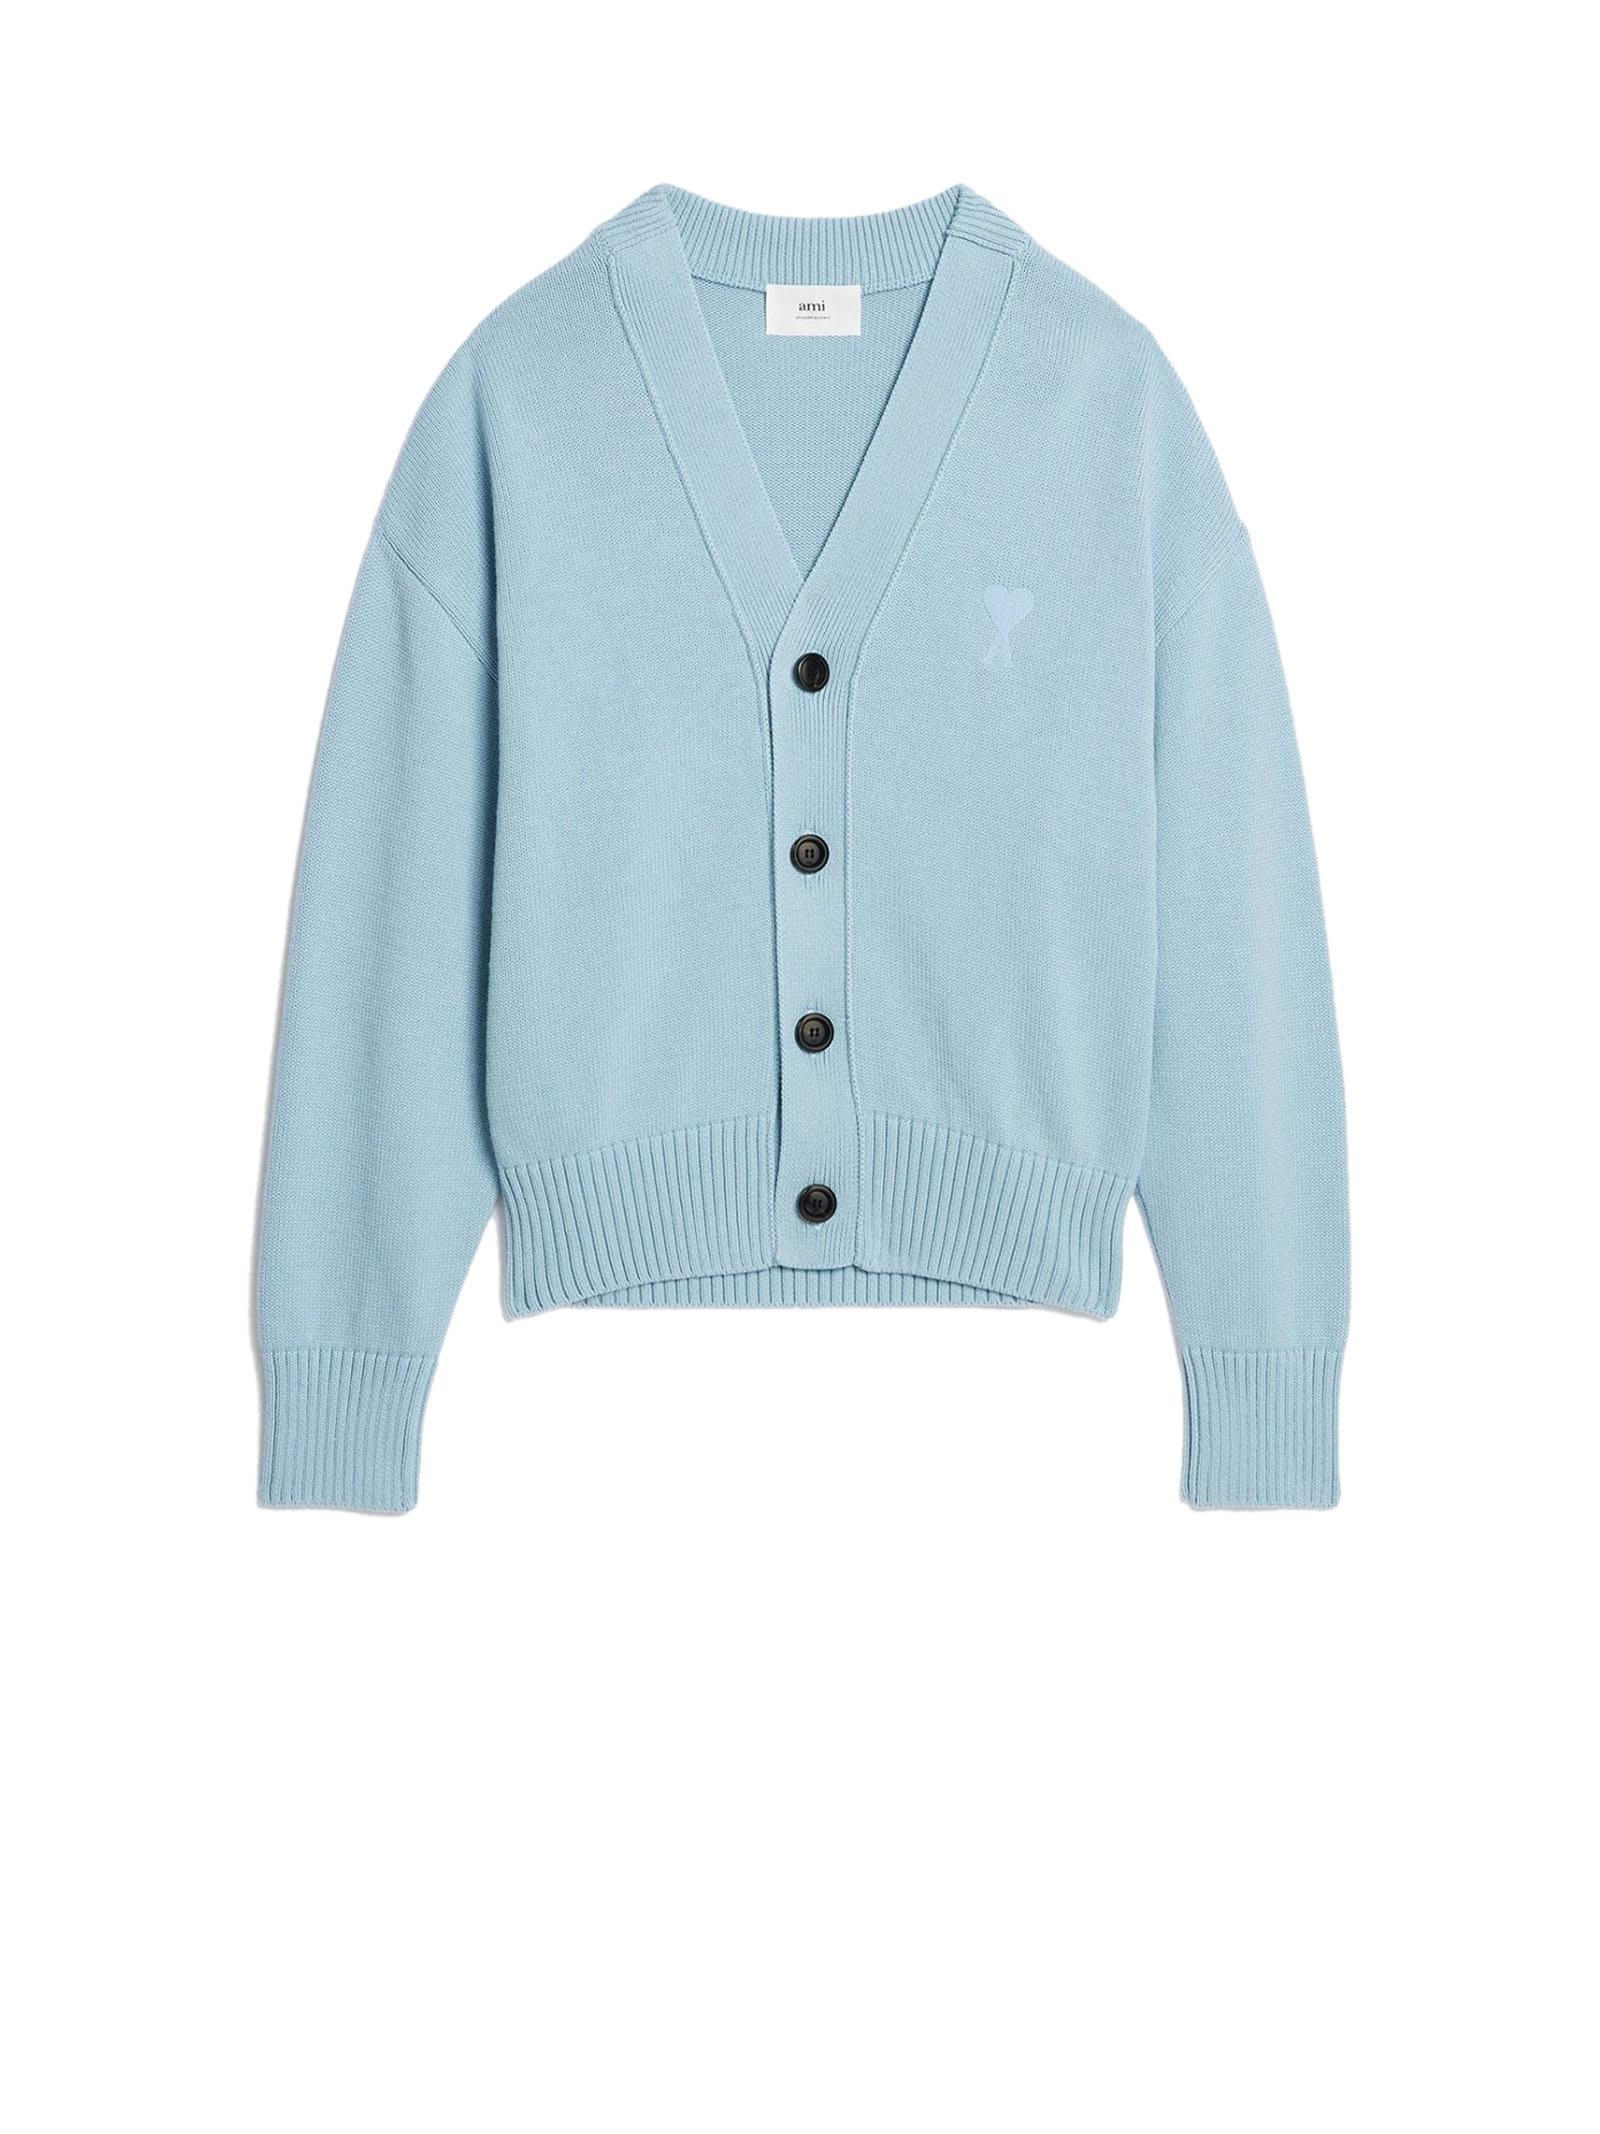 AMI ALEXANDRE MATTIUSSI LIGHT BLUE CARDIGAN IN COTTON WITH BUTTONS